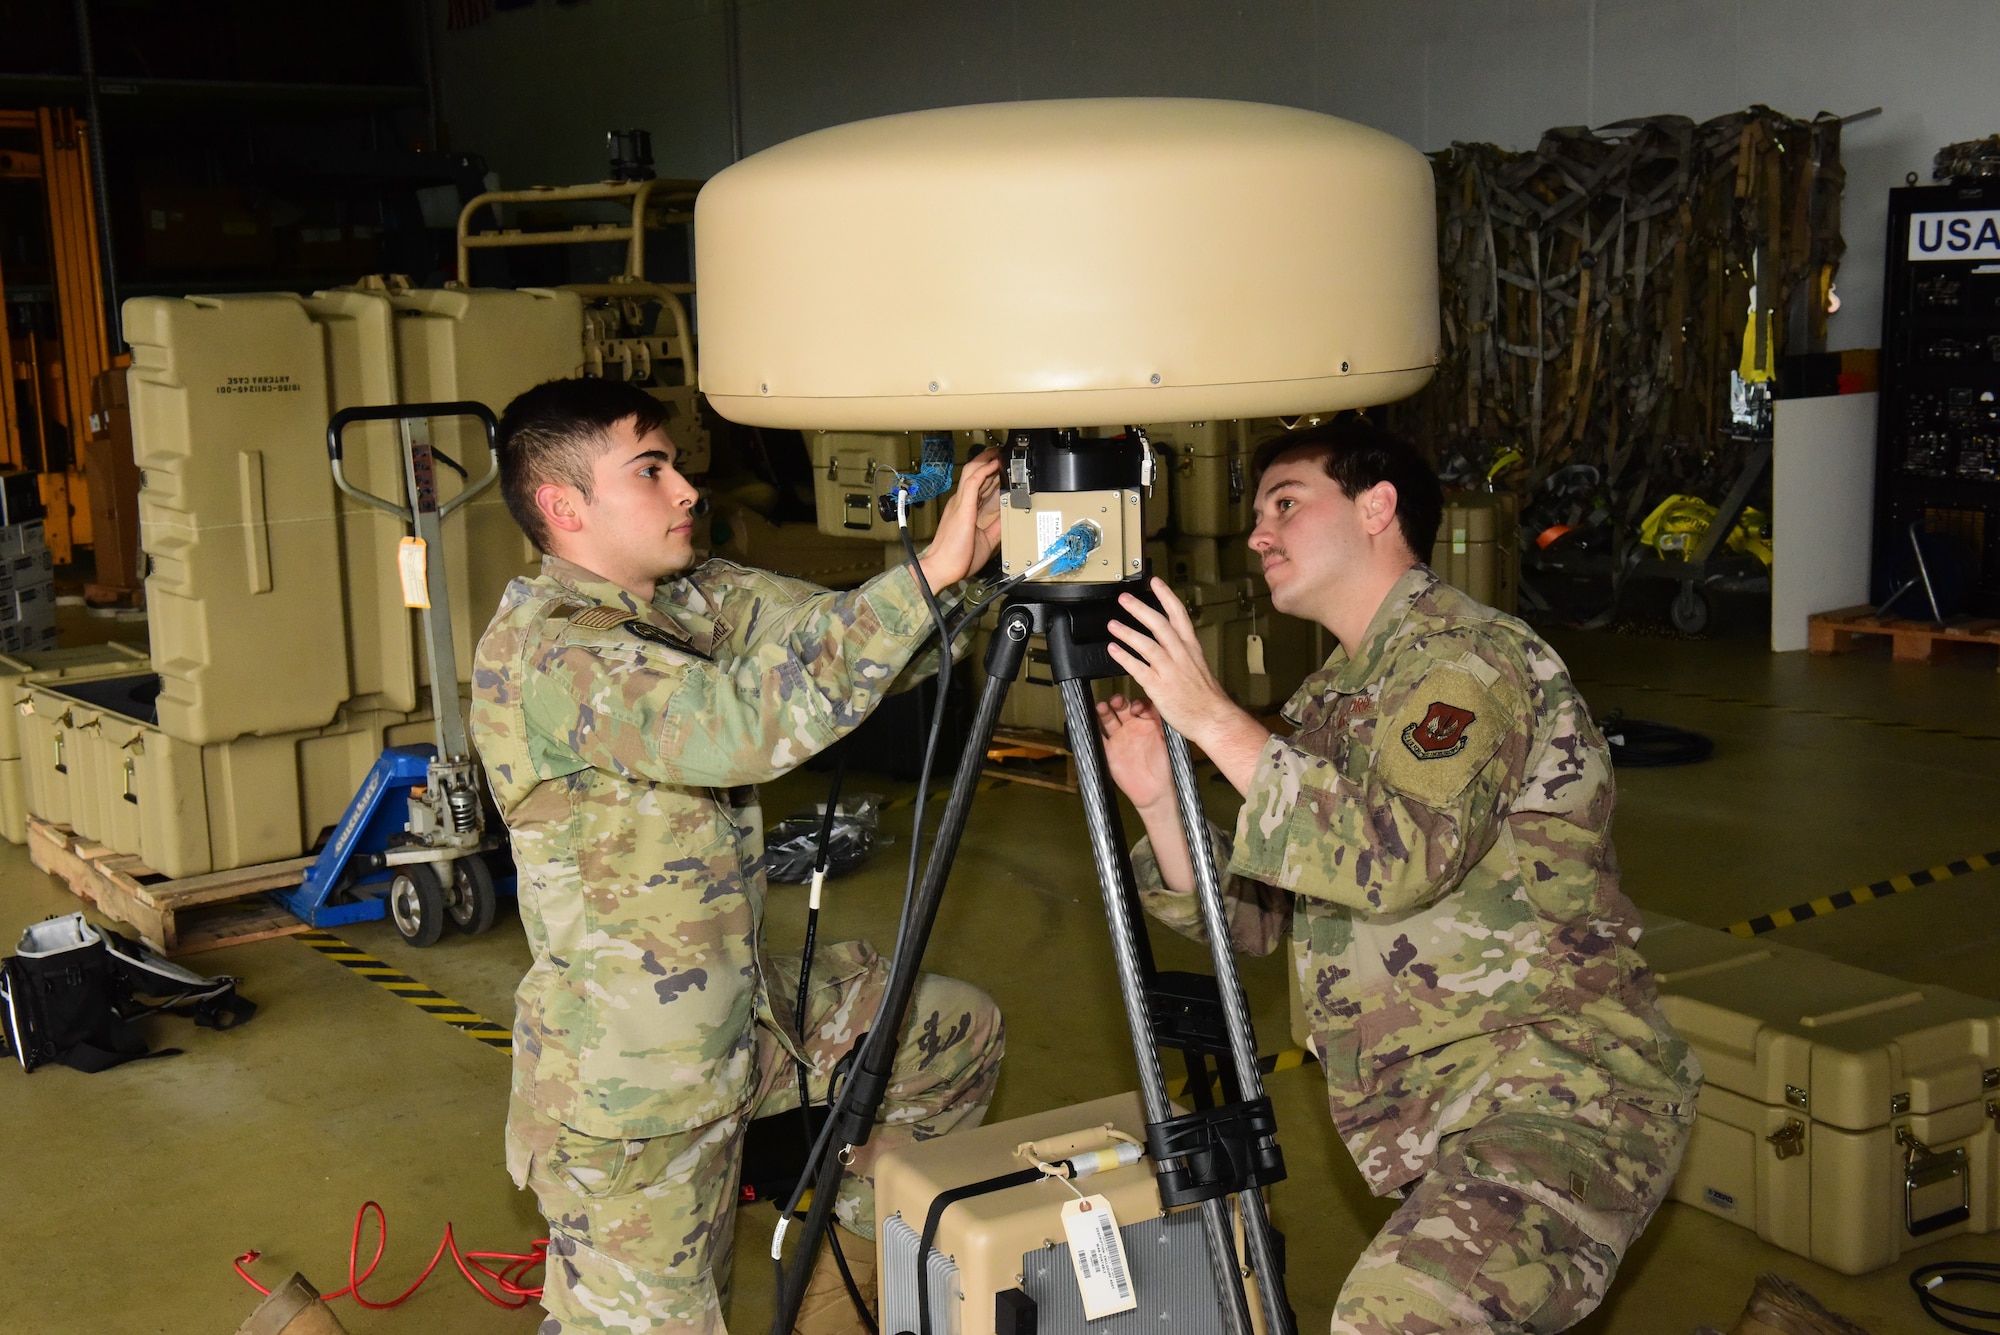 USAFE unveils the newest Tactical Air Navigation System. Small and portable, the antenna can provide precise distance information to 250 aircraft simultaneously to coordinate an effective air bridge to expedite military airlift and air operations wherever needed.